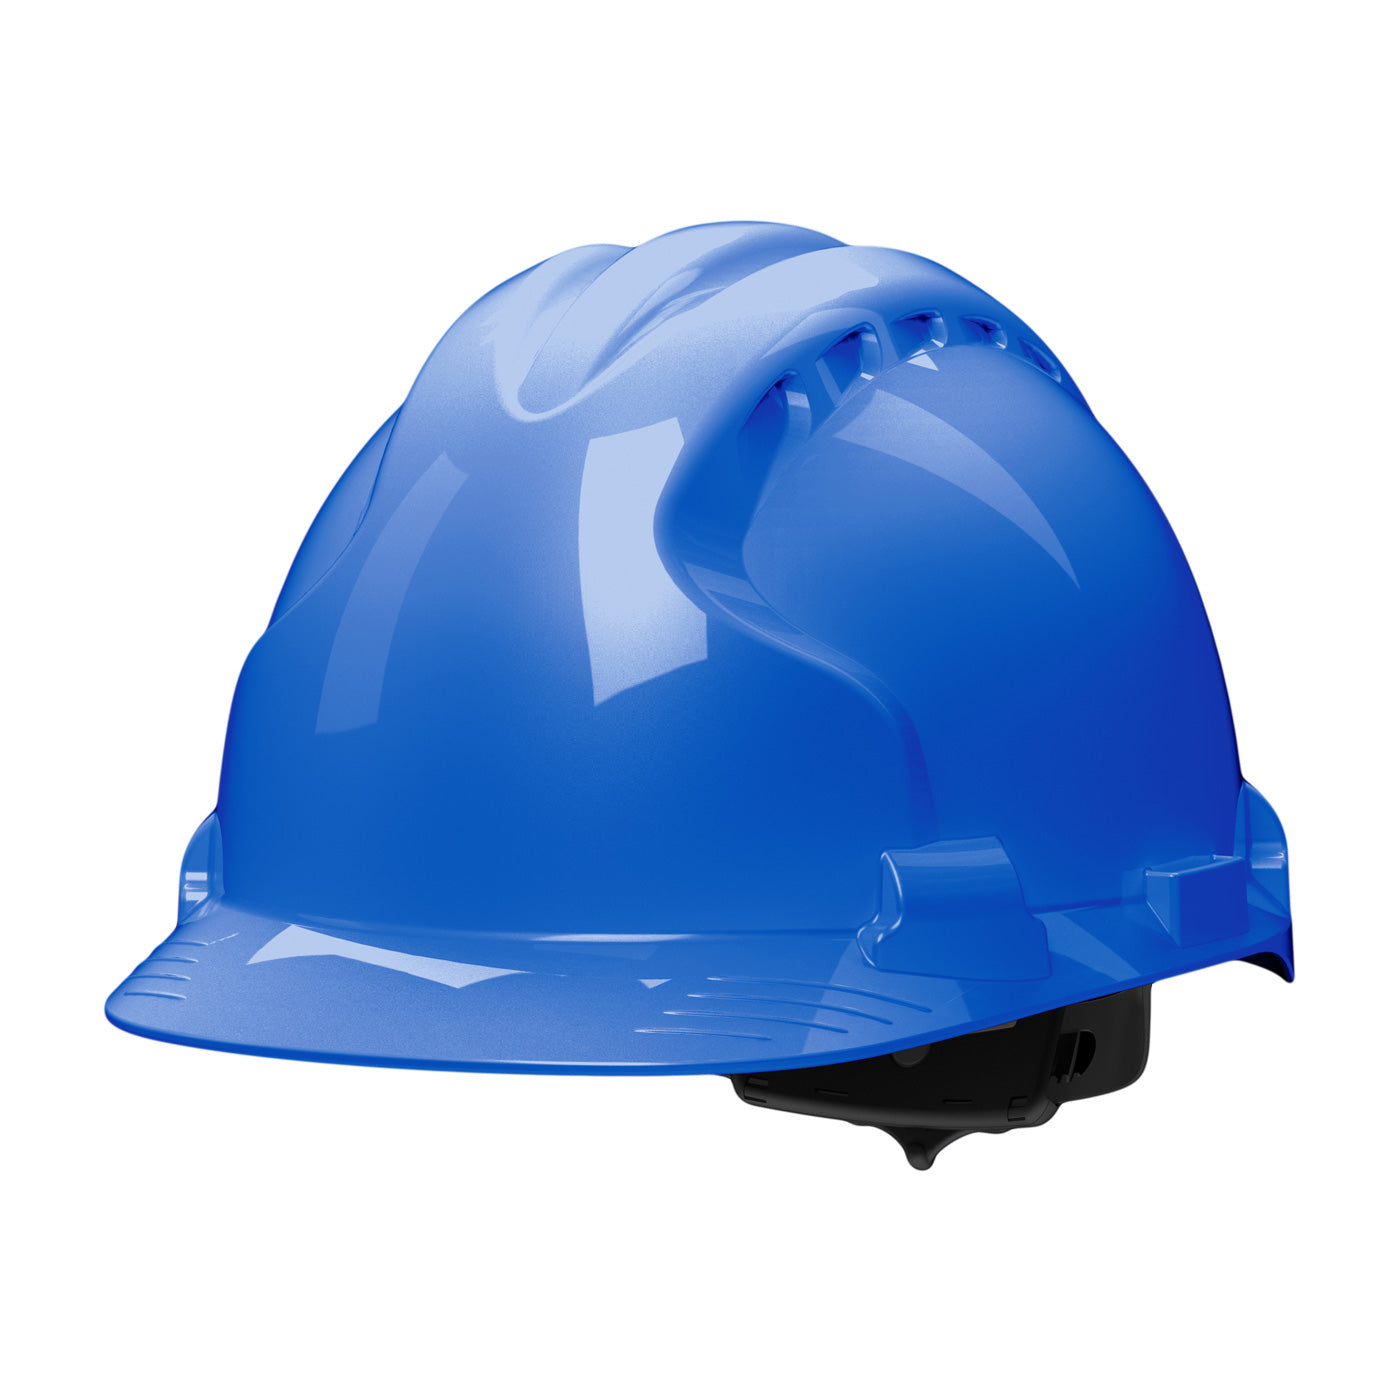 Protective Industrial Products-MK8 EVOLUTION® CAP STYLE HARD HAT (NON VENTED)-eSafety Supplies, Inc